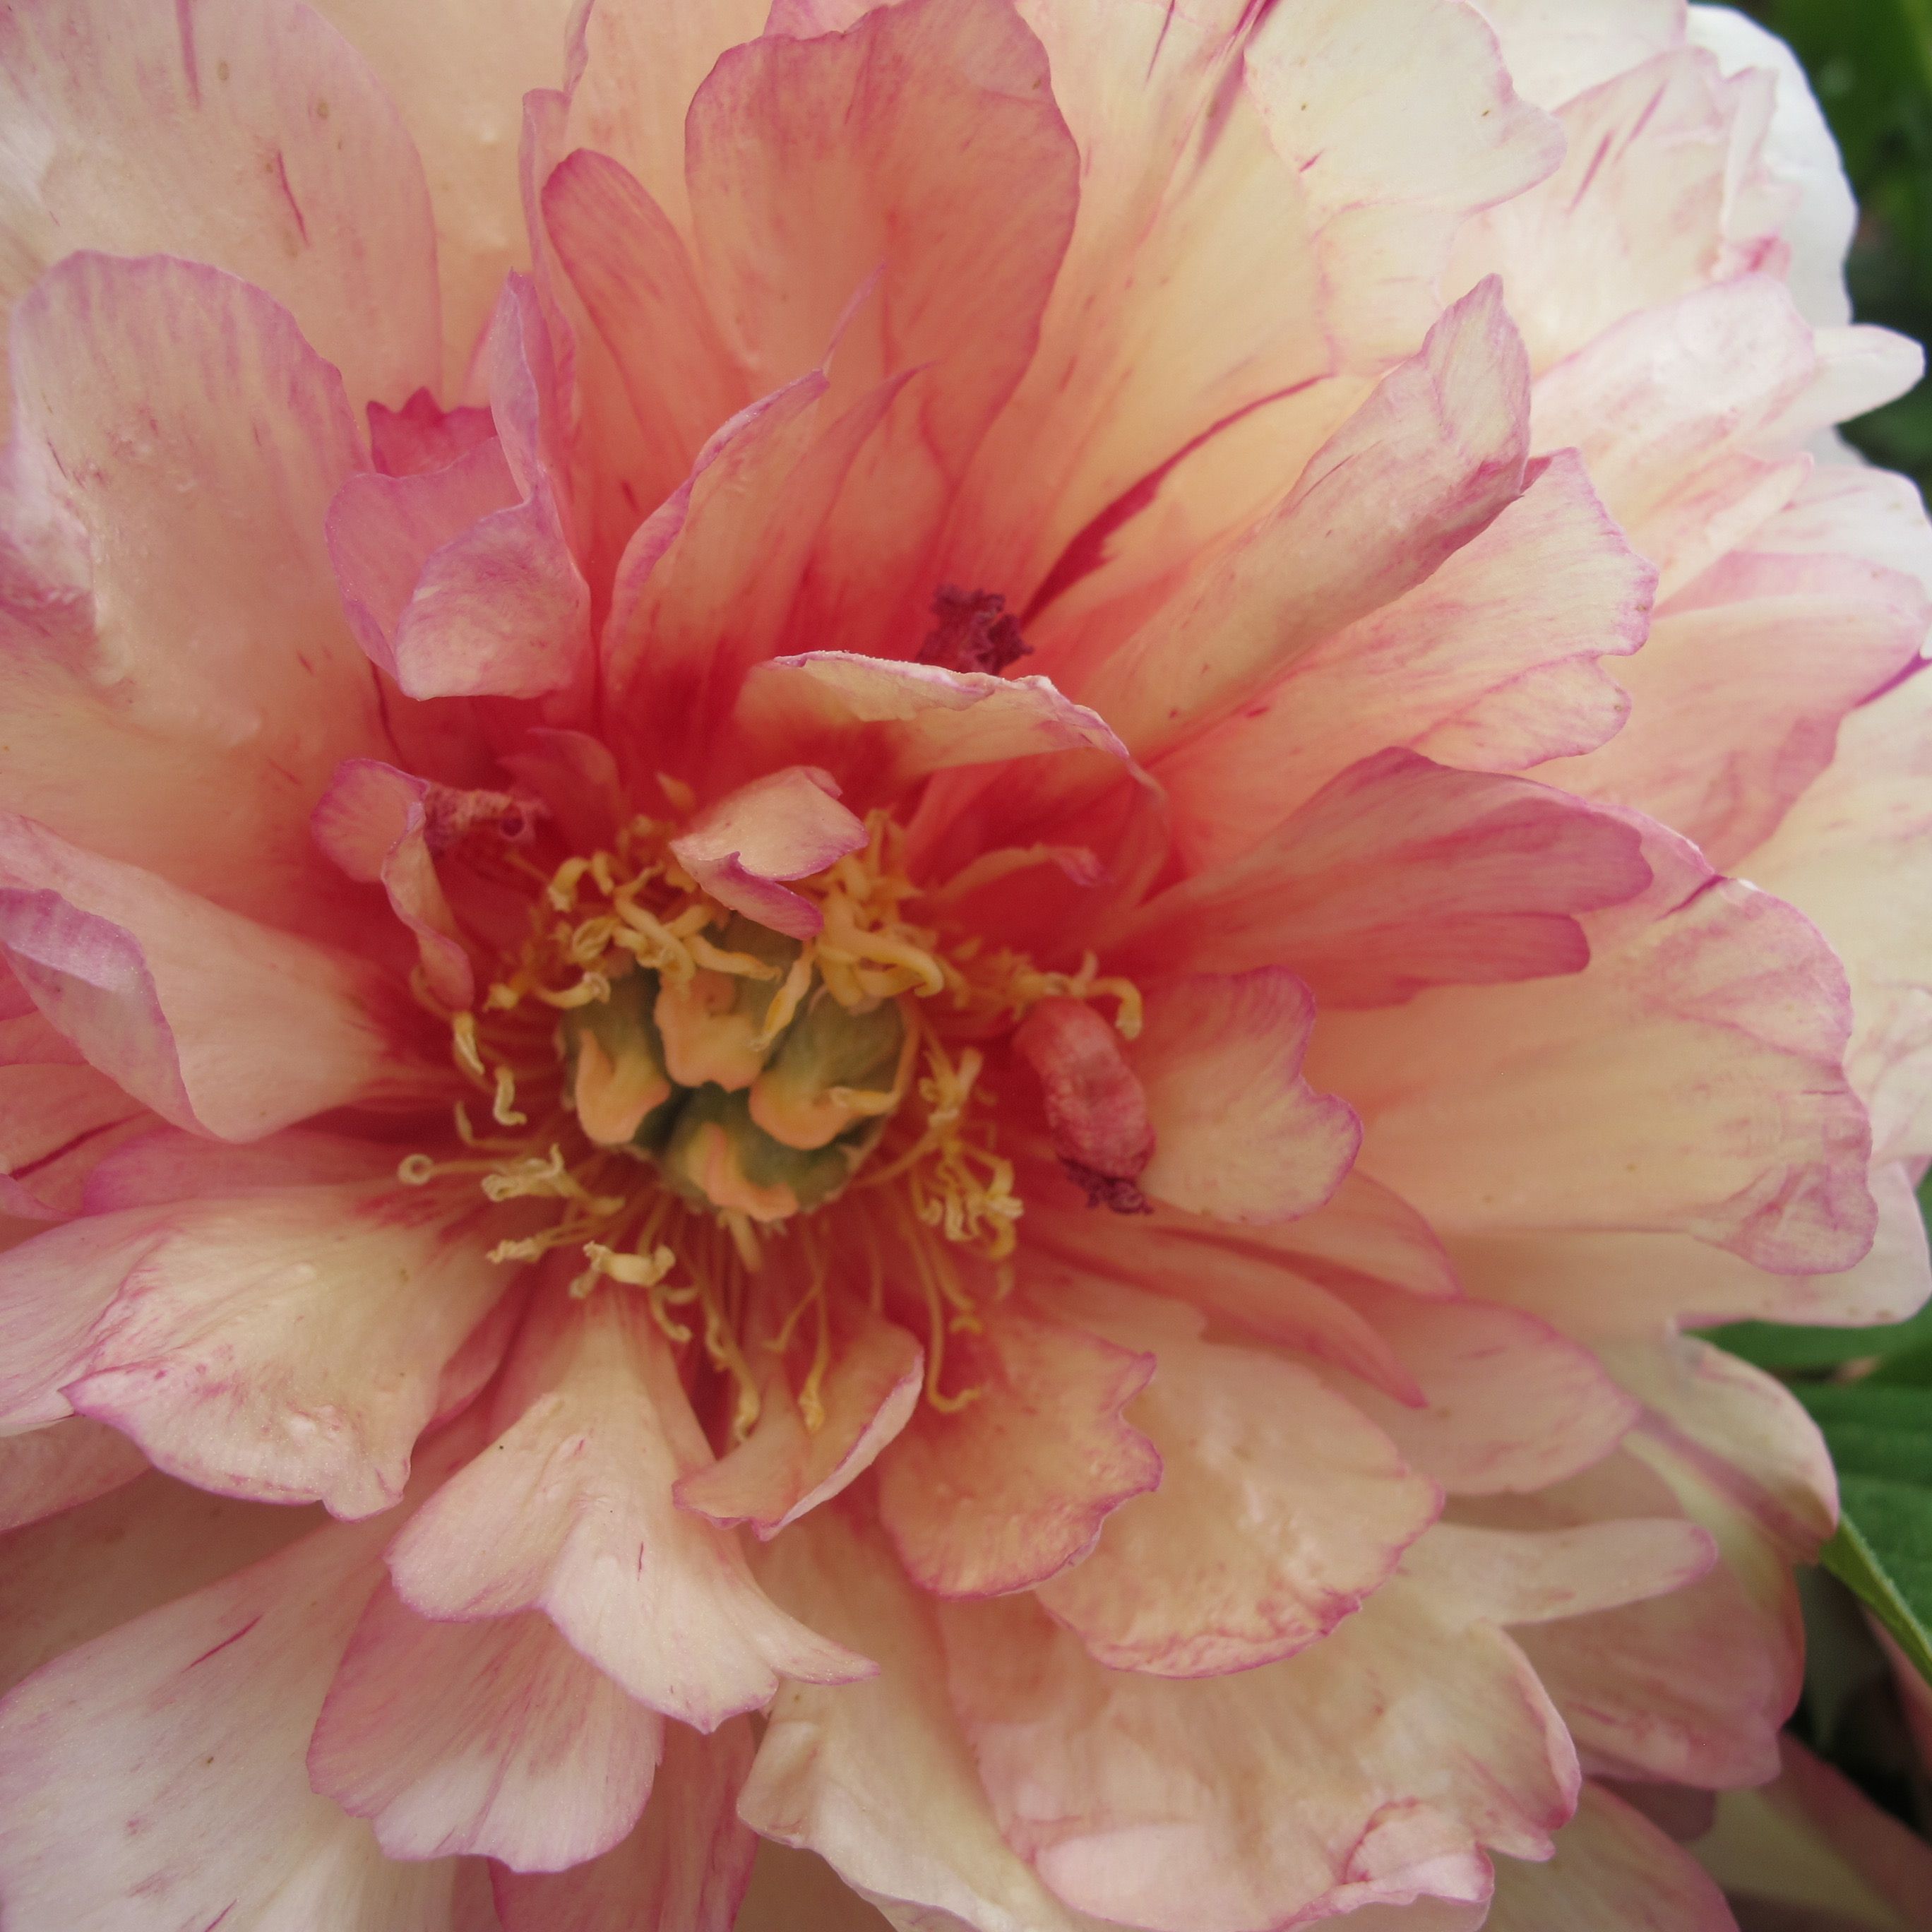 images/plants/paeonia/pae-truly-scrumptious/pae-truly-scrumptious-0003.JPG